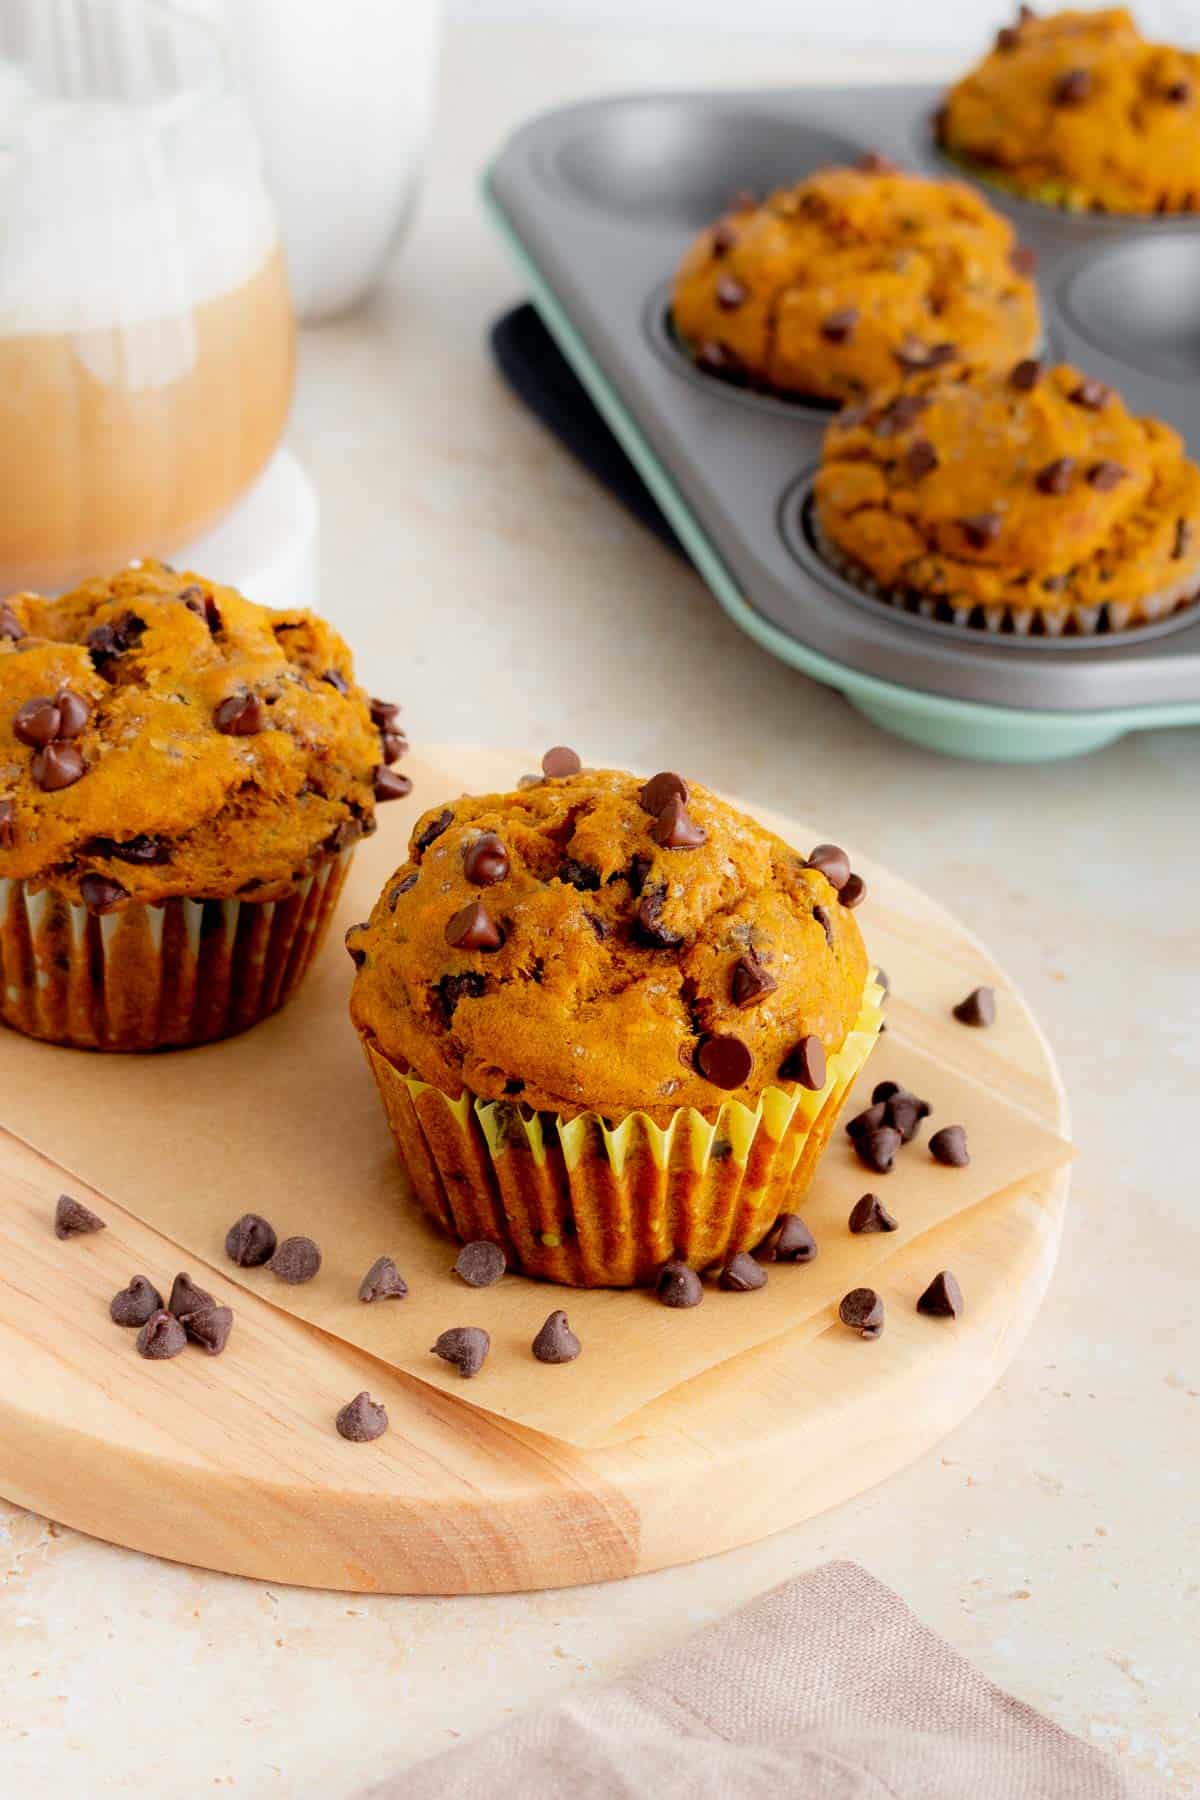 Two pumpkin banana muffins on a wooden board with three in a muffin tin in the background along with a mug of coffee.